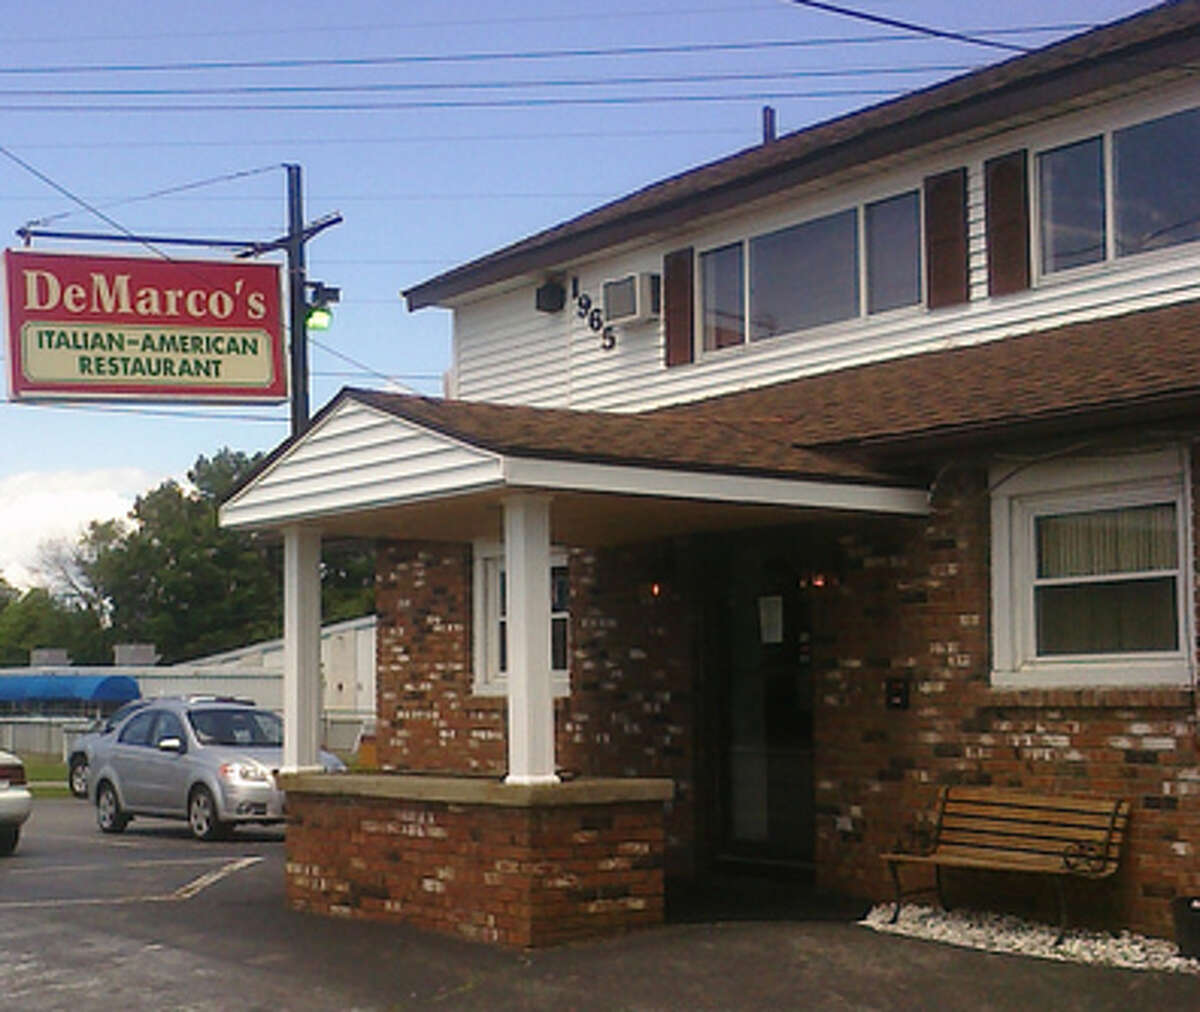 DeMarco's Restaurant at 1965 Central Ave. in Colonie.